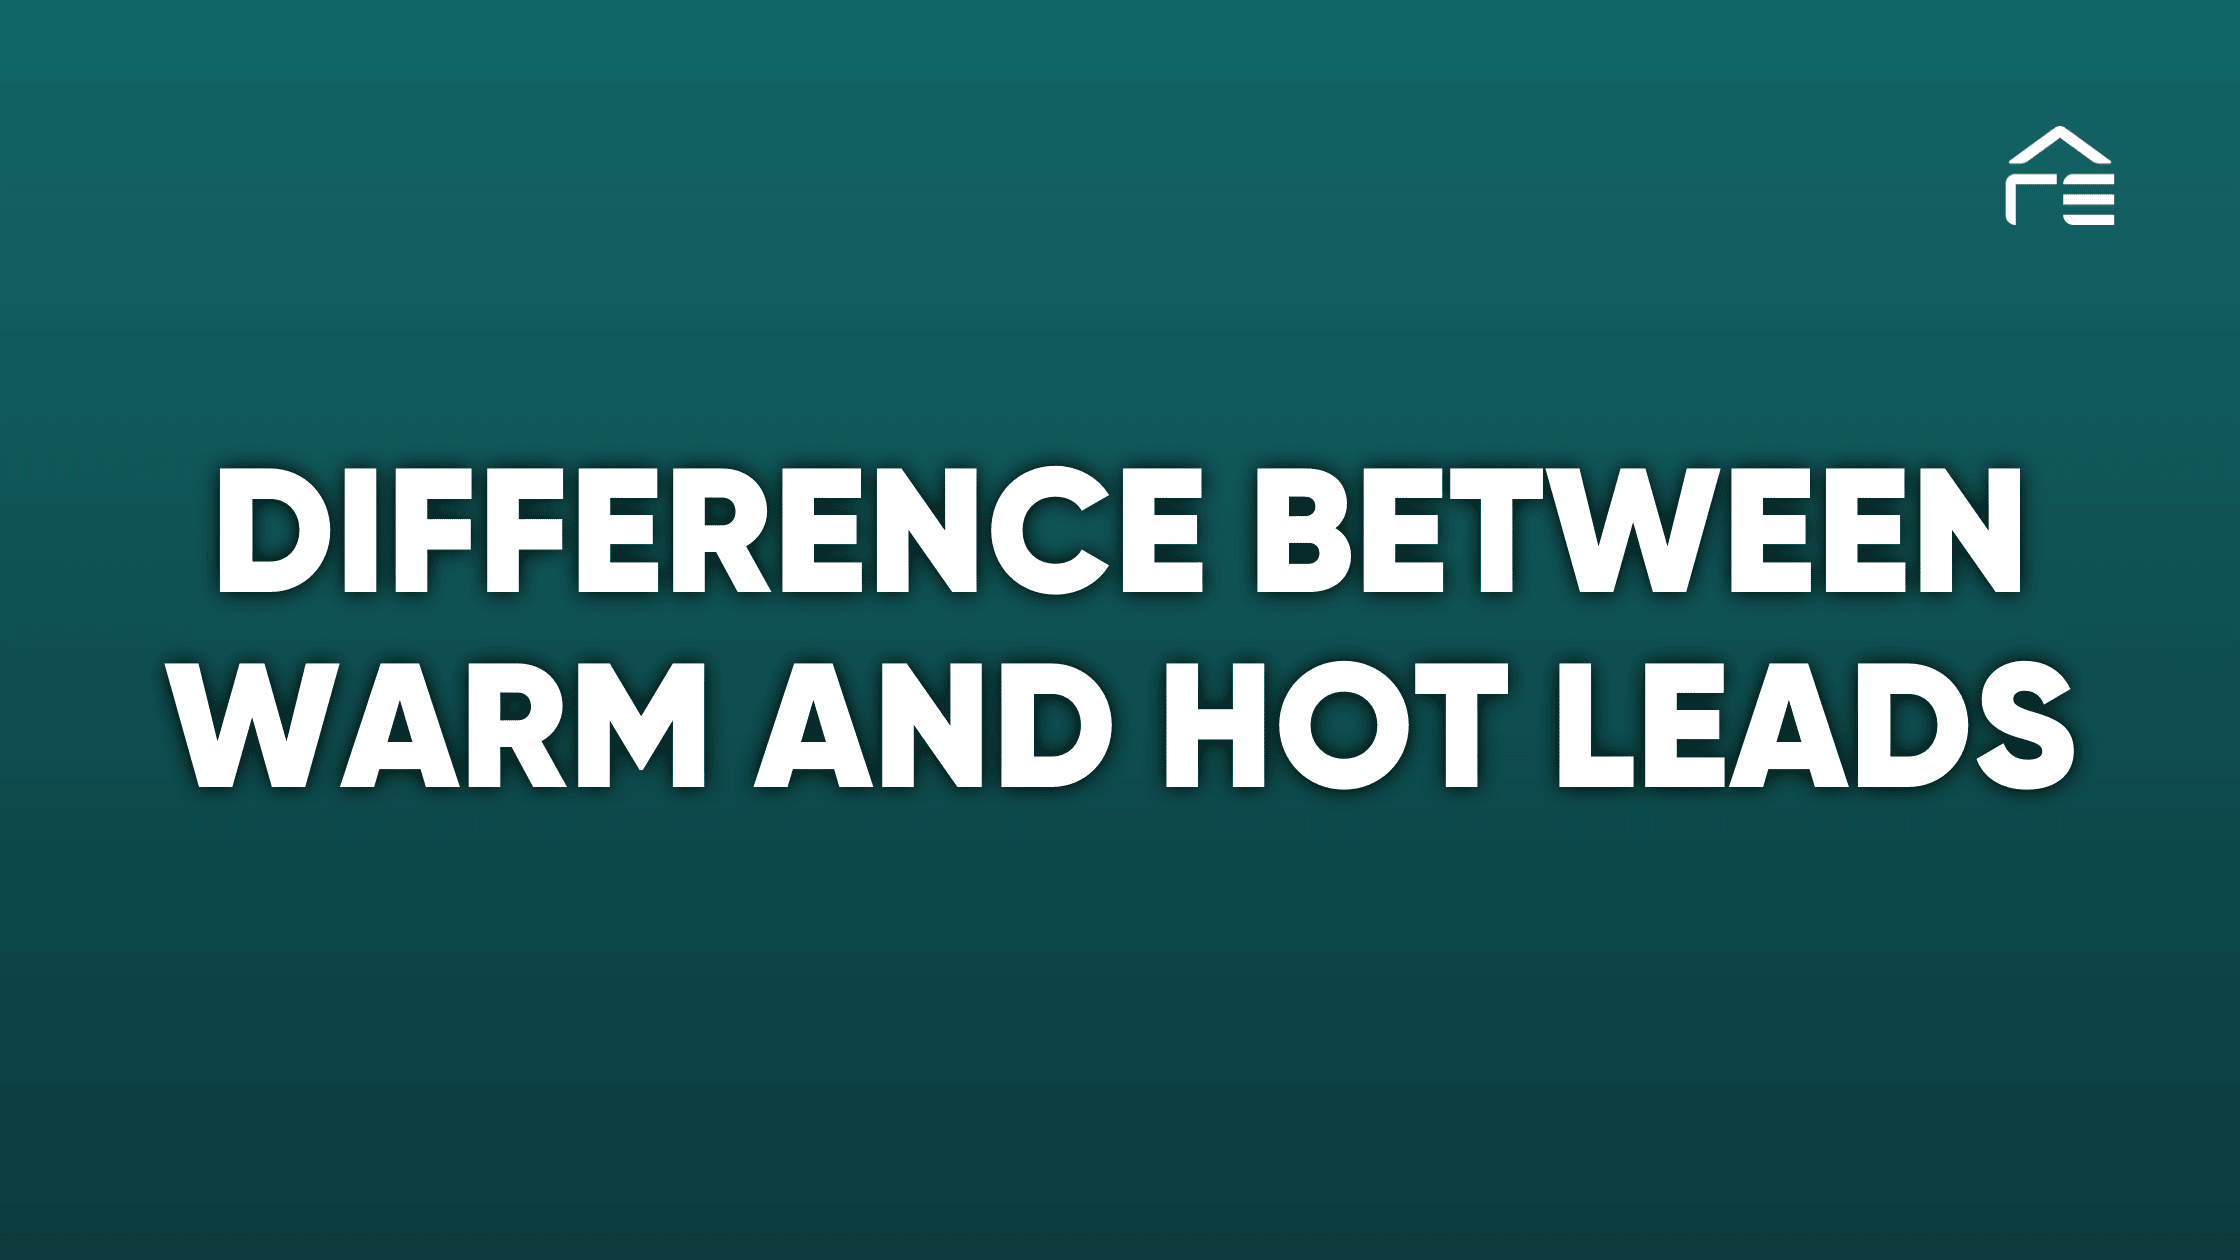 What is the Difference between Warm and Hot Leads?